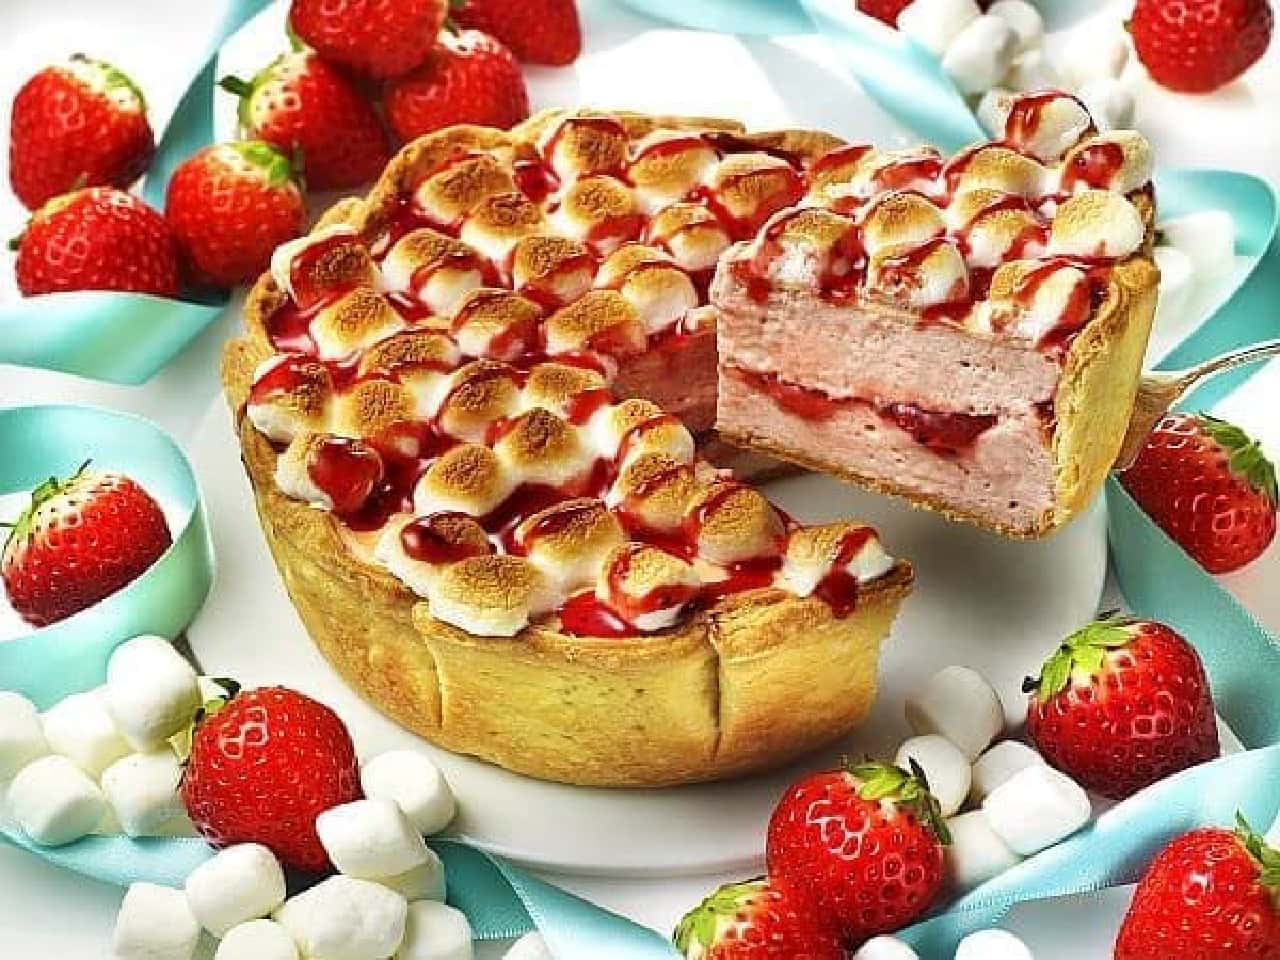 Pablo "Grilled Marshmallow Strawberry Cheese Tart"